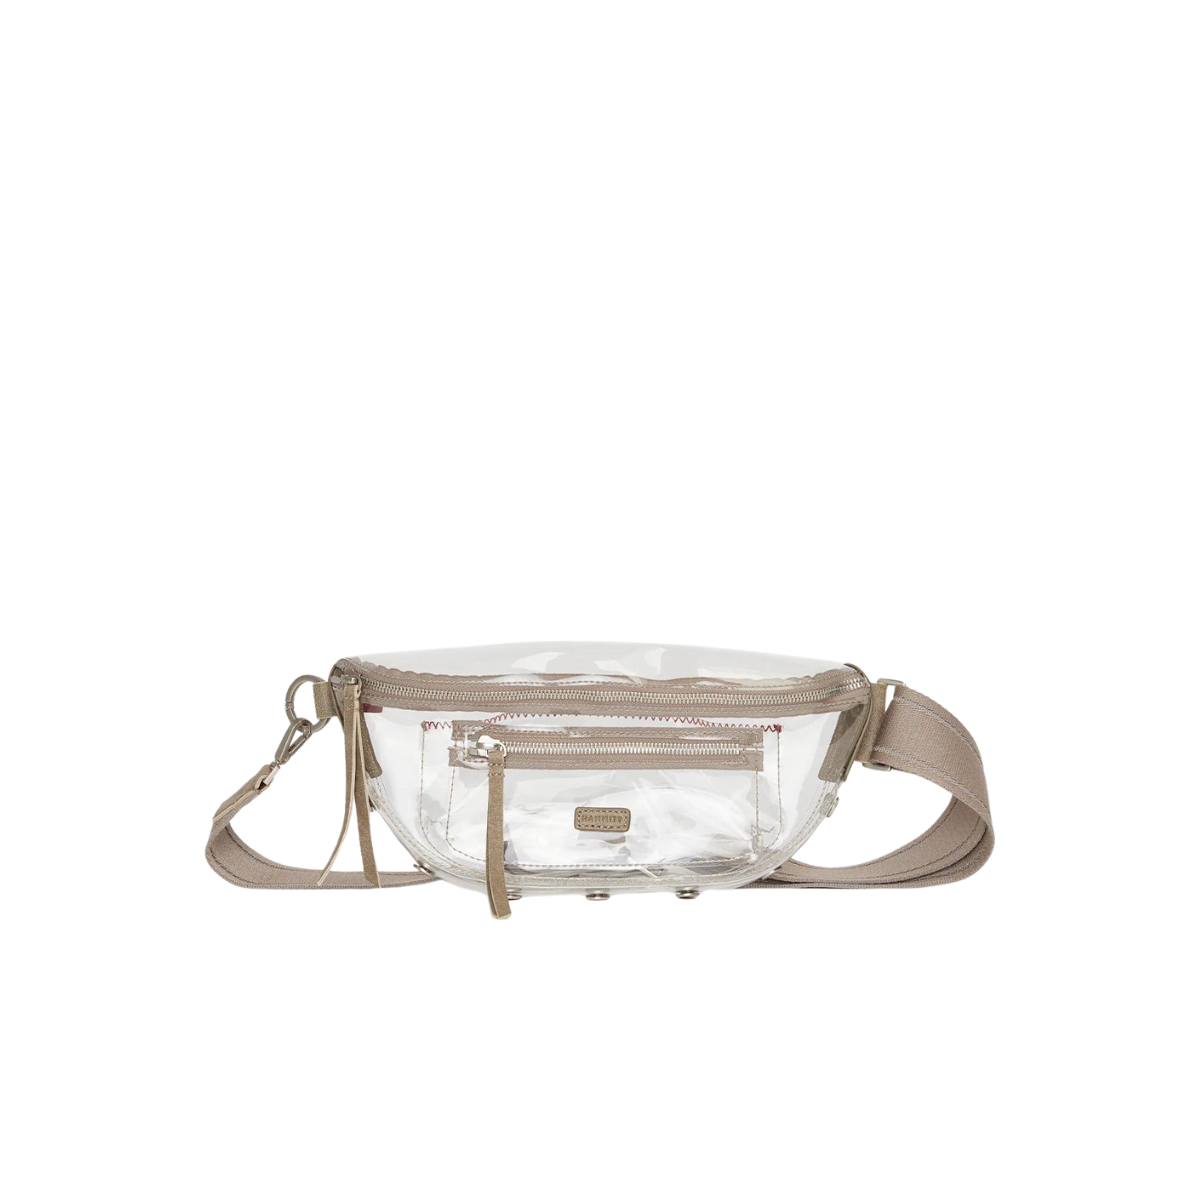 Hammitt Charles Crossbody Medium Belt Bag in Clear Pewter with Brushed Silver